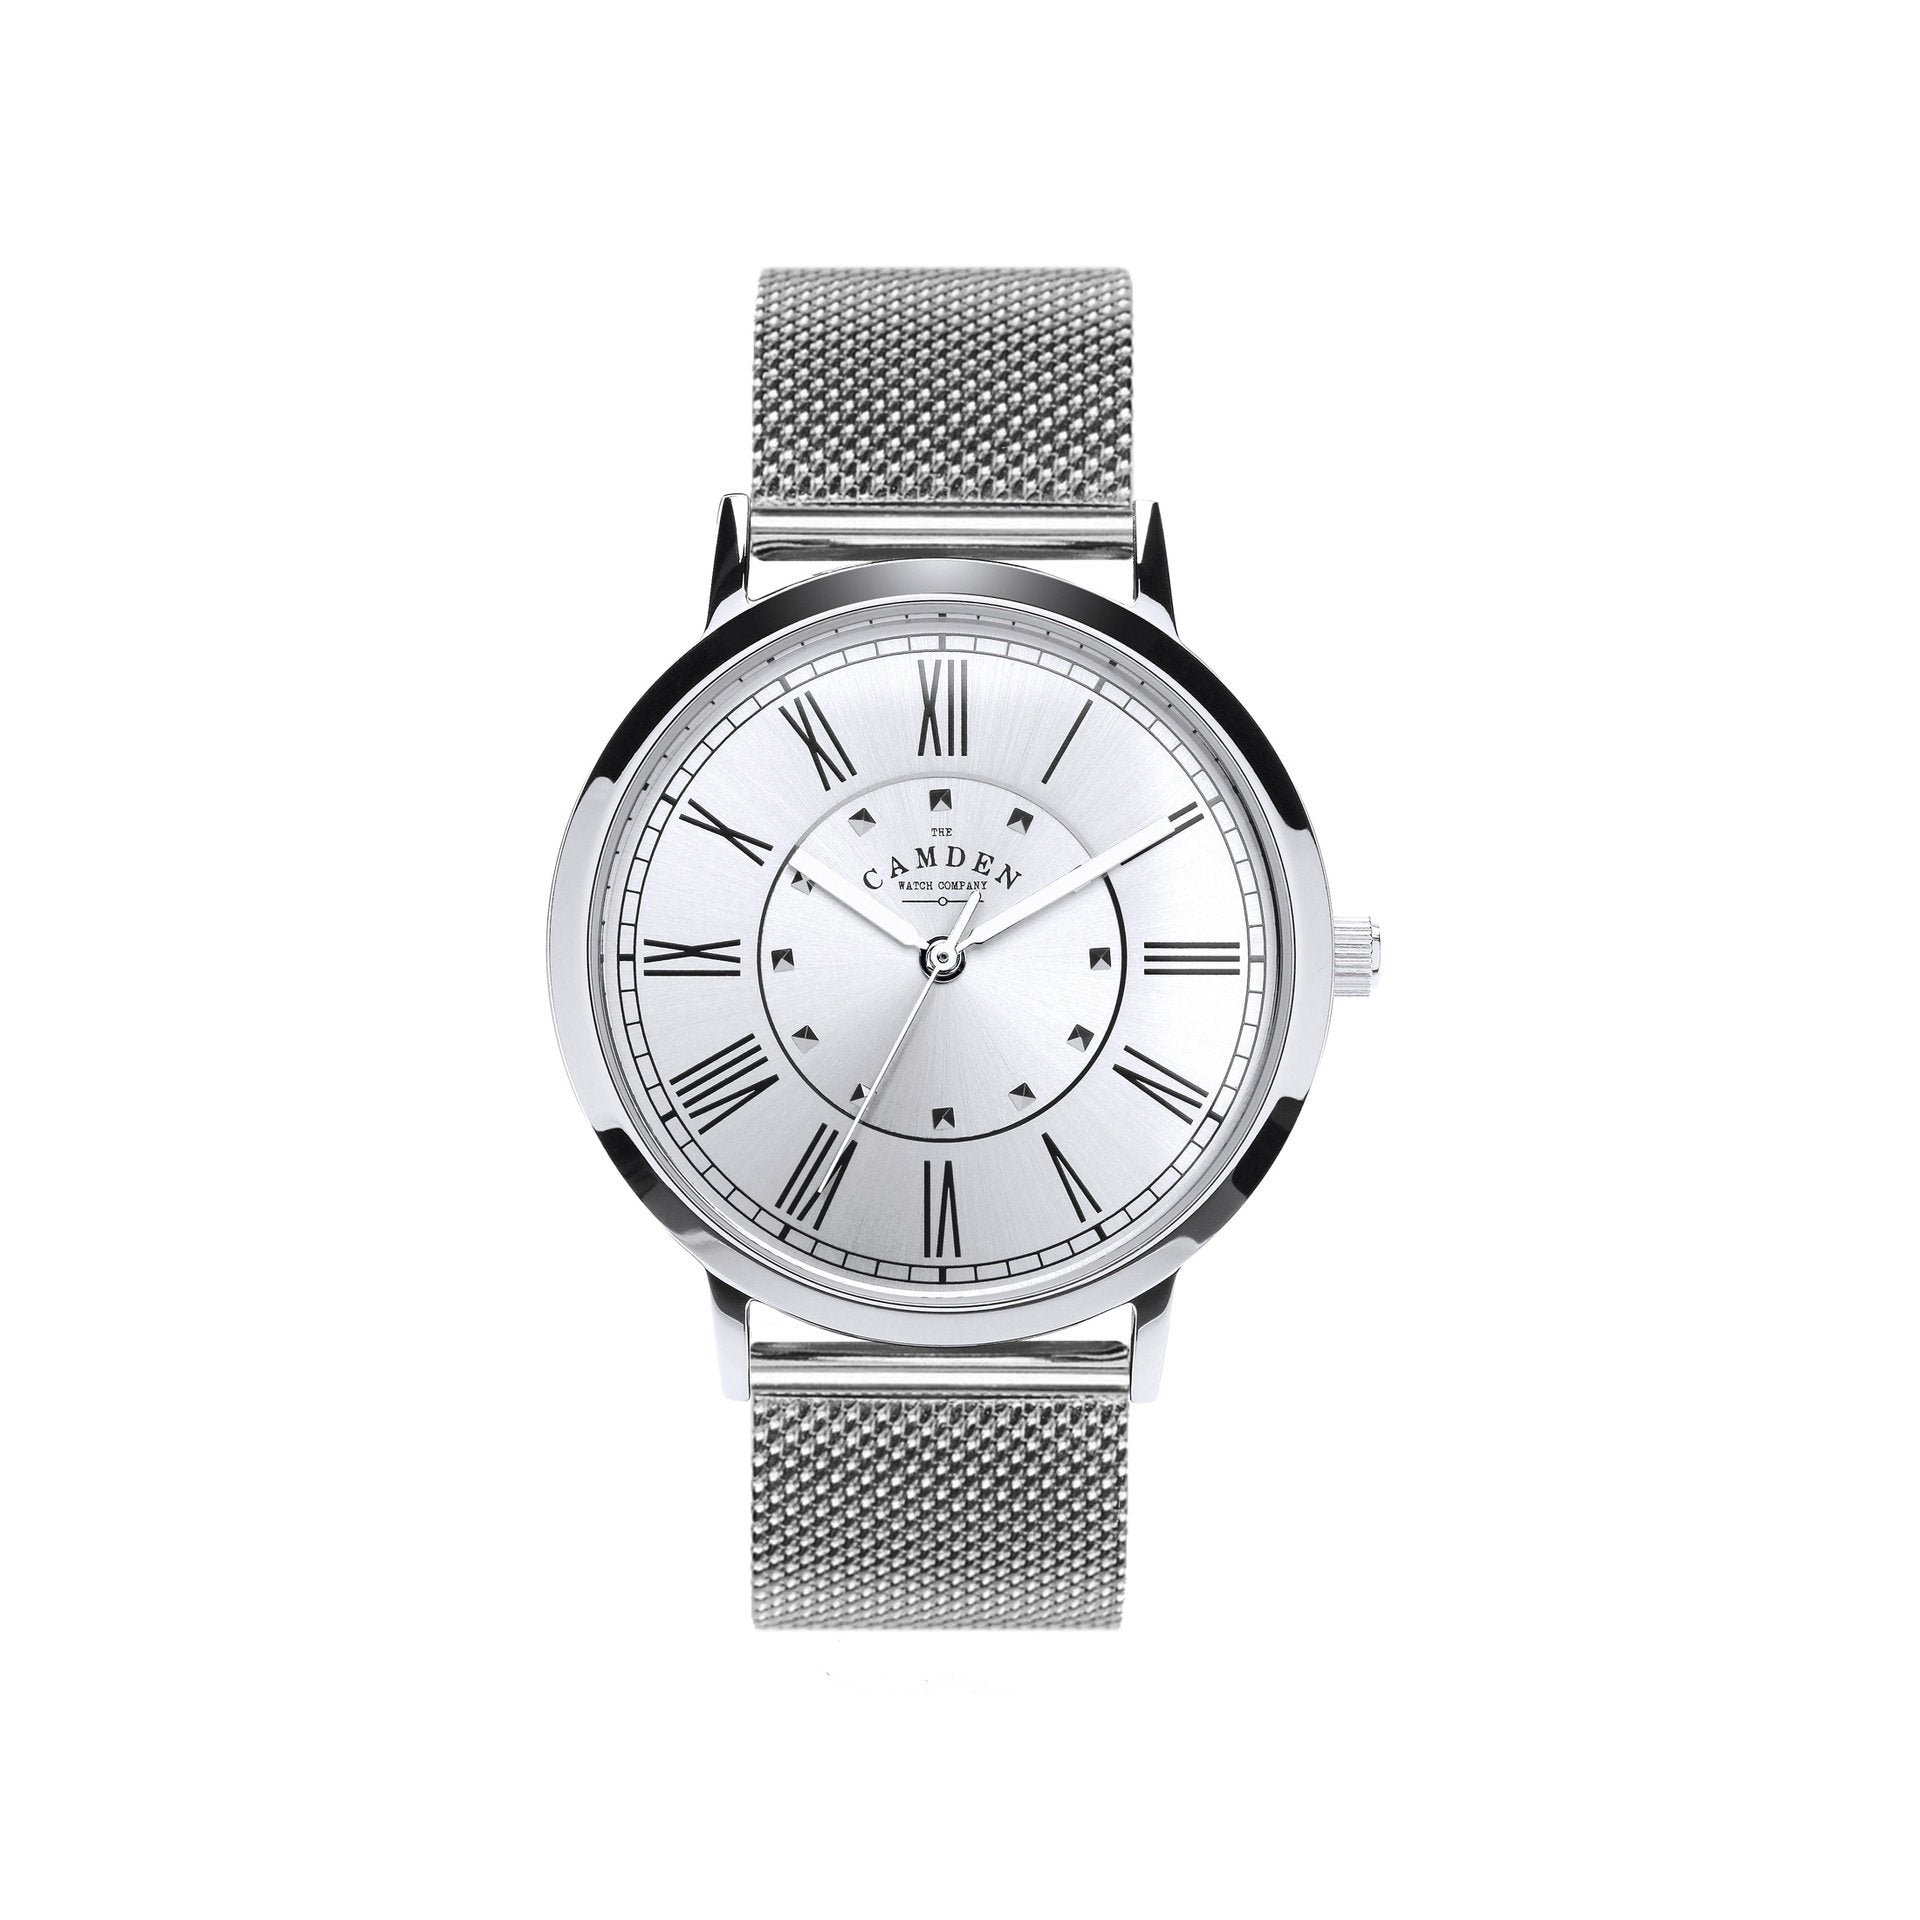 STEEL No.27 WATCH WITH SILVER DIAL AND MESH BRACELET